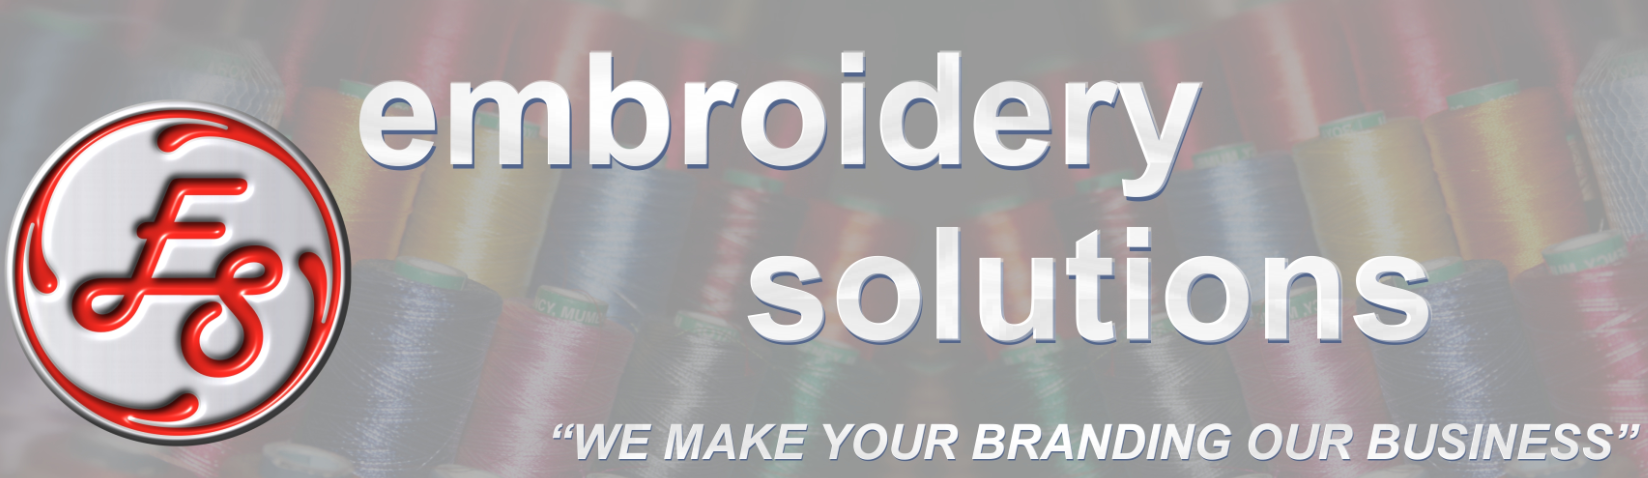 Embroidery Solutions